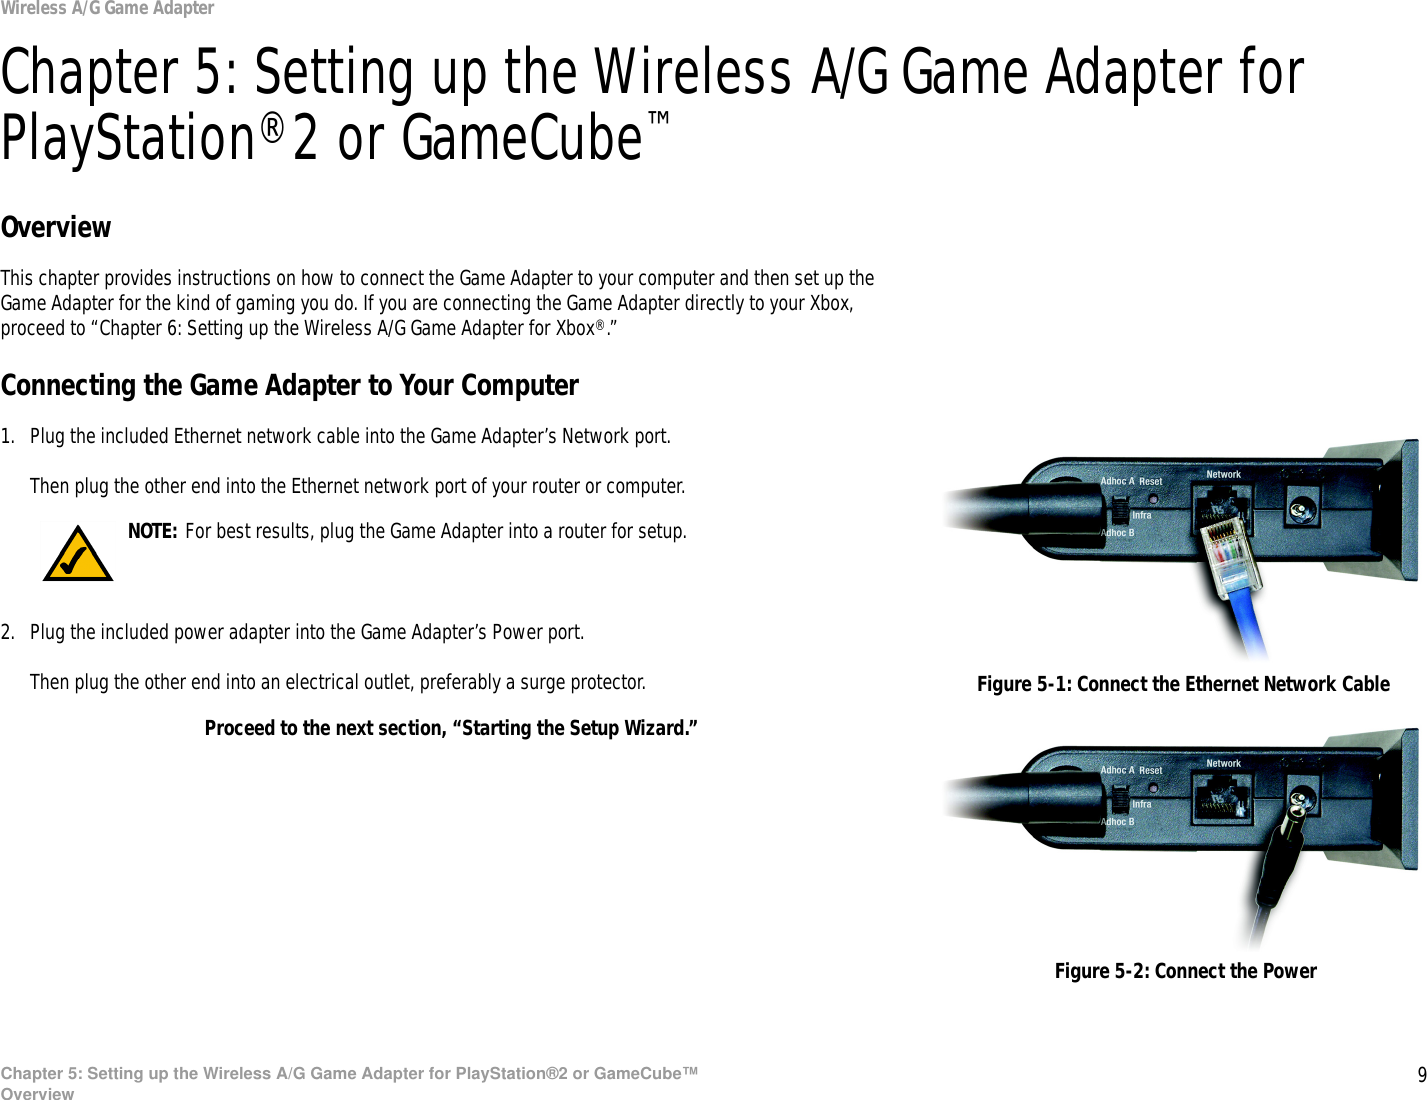 9Chapter 5: Setting up the Wireless A/G Game Adapter for PlayStation®2 or GameCube™OverviewWireless A/G Game AdapterChapter 5: Setting up the Wireless A/G Game Adapter for PlayStation®2 or GameCube™OverviewThis chapter provides instructions on how to connect the Game Adapter to your computer and then set up the Game Adapter for the kind of gaming you do. If you are connecting the Game Adapter directly to your Xbox, proceed to “Chapter 6: Setting up the Wireless A/G Game Adapter for Xbox®.”Connecting the Game Adapter to Your Computer1. Plug the included Ethernet network cable into the Game Adapter’s Network port.Then plug the other end into the Ethernet network port of your router or computer.2. Plug the included power adapter into the Game Adapter’s Power port.Then plug the other end into an electrical outlet, preferably a surge protector.Proceed to the next section, “Starting the Setup Wizard.”Figure 5-1: Connect the Ethernet Network CableFigure 5-2: Connect the PowerNOTE: For best results, plug the Game Adapter into a router for setup.